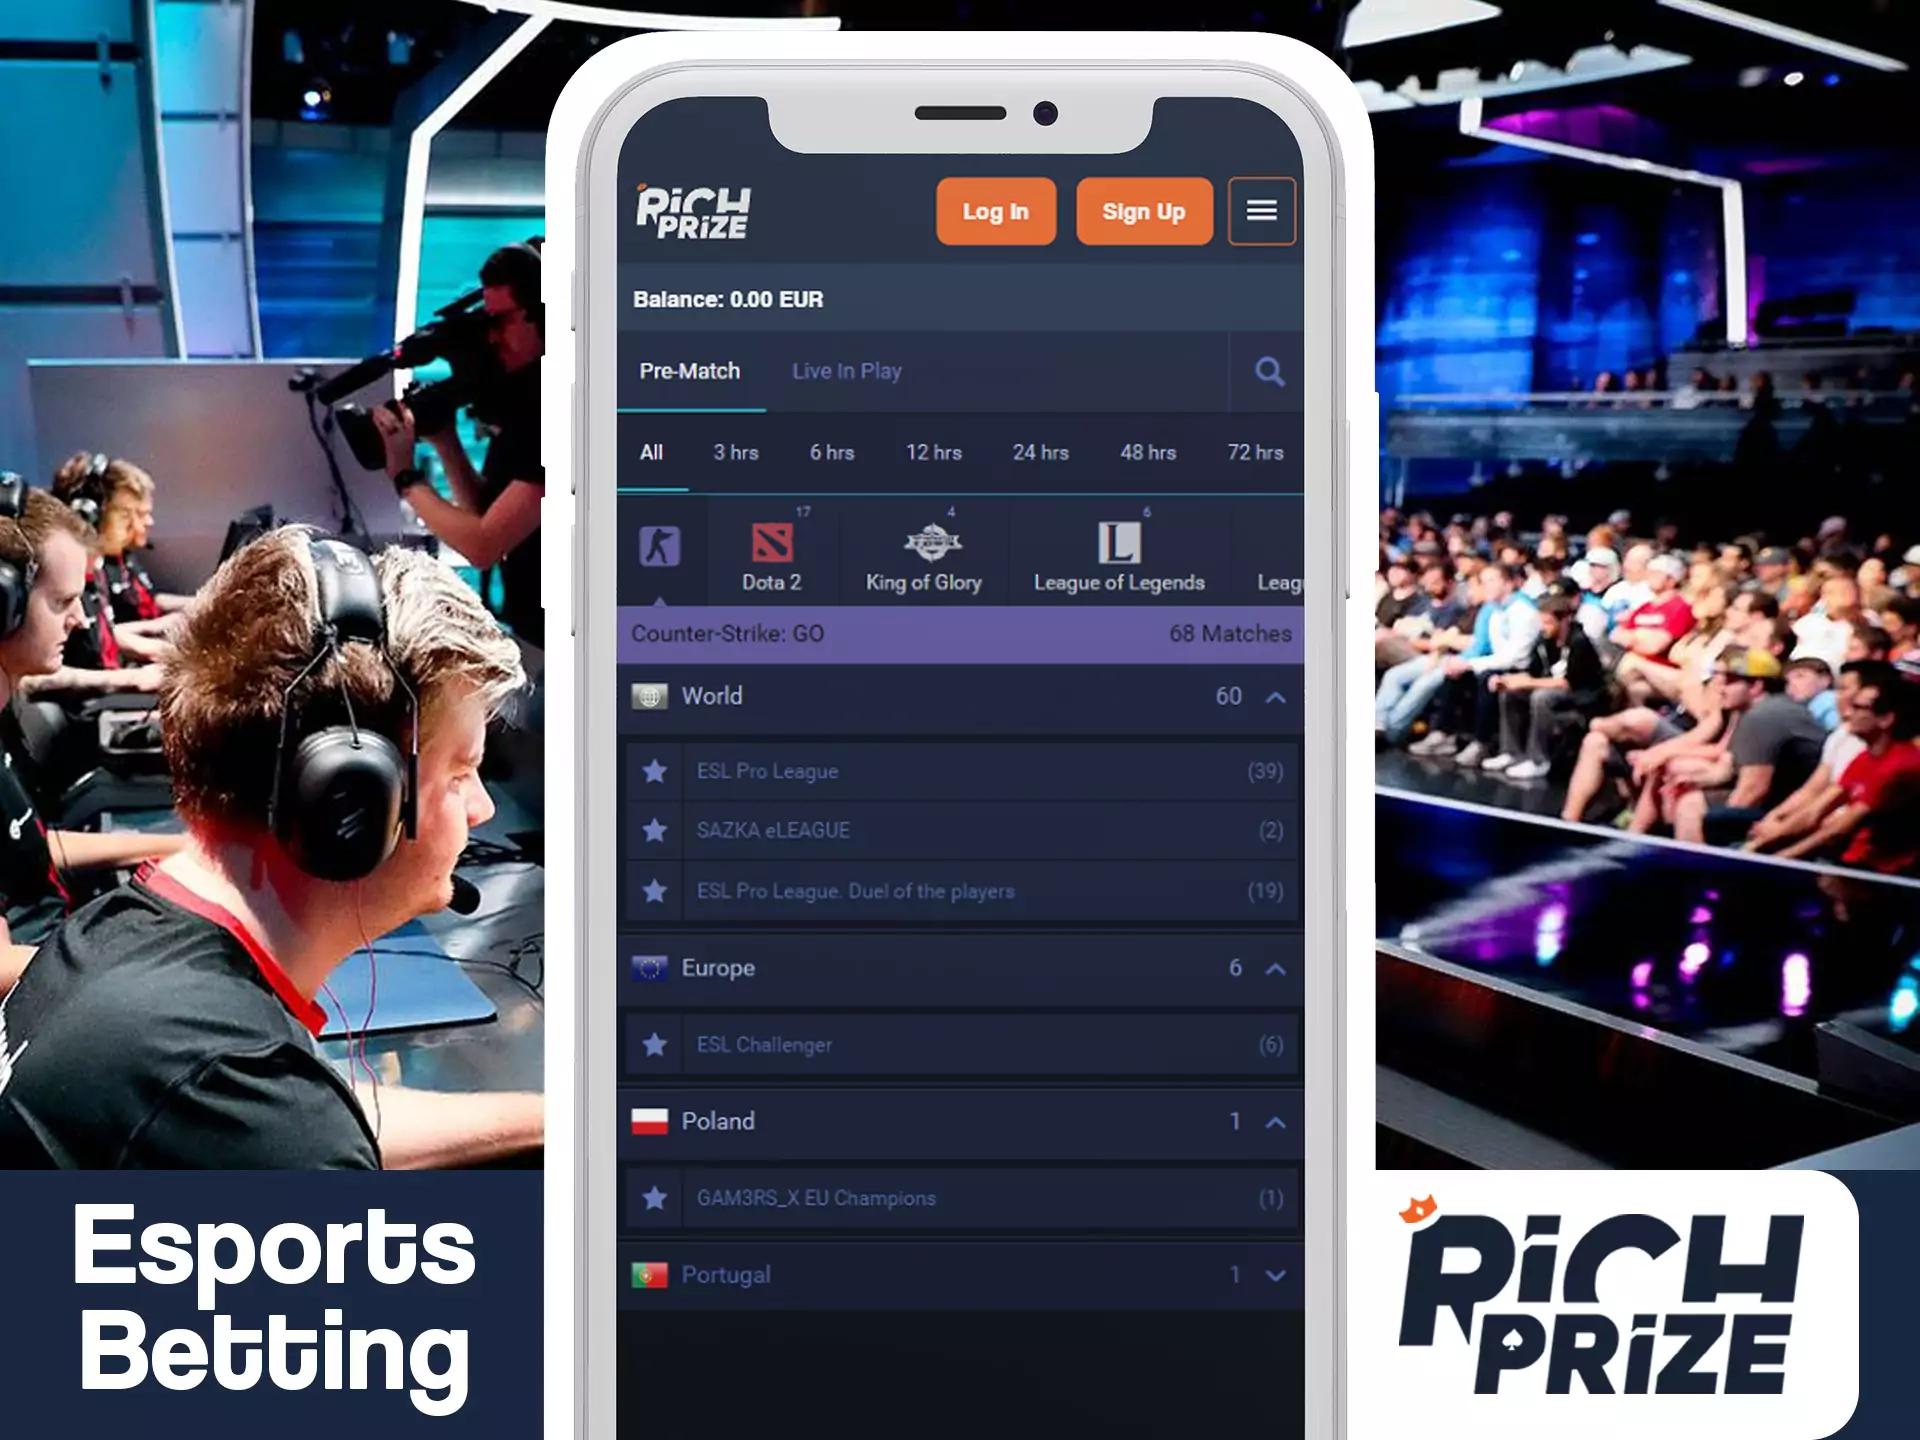 Watch how esports team become legends in RichPrize app.